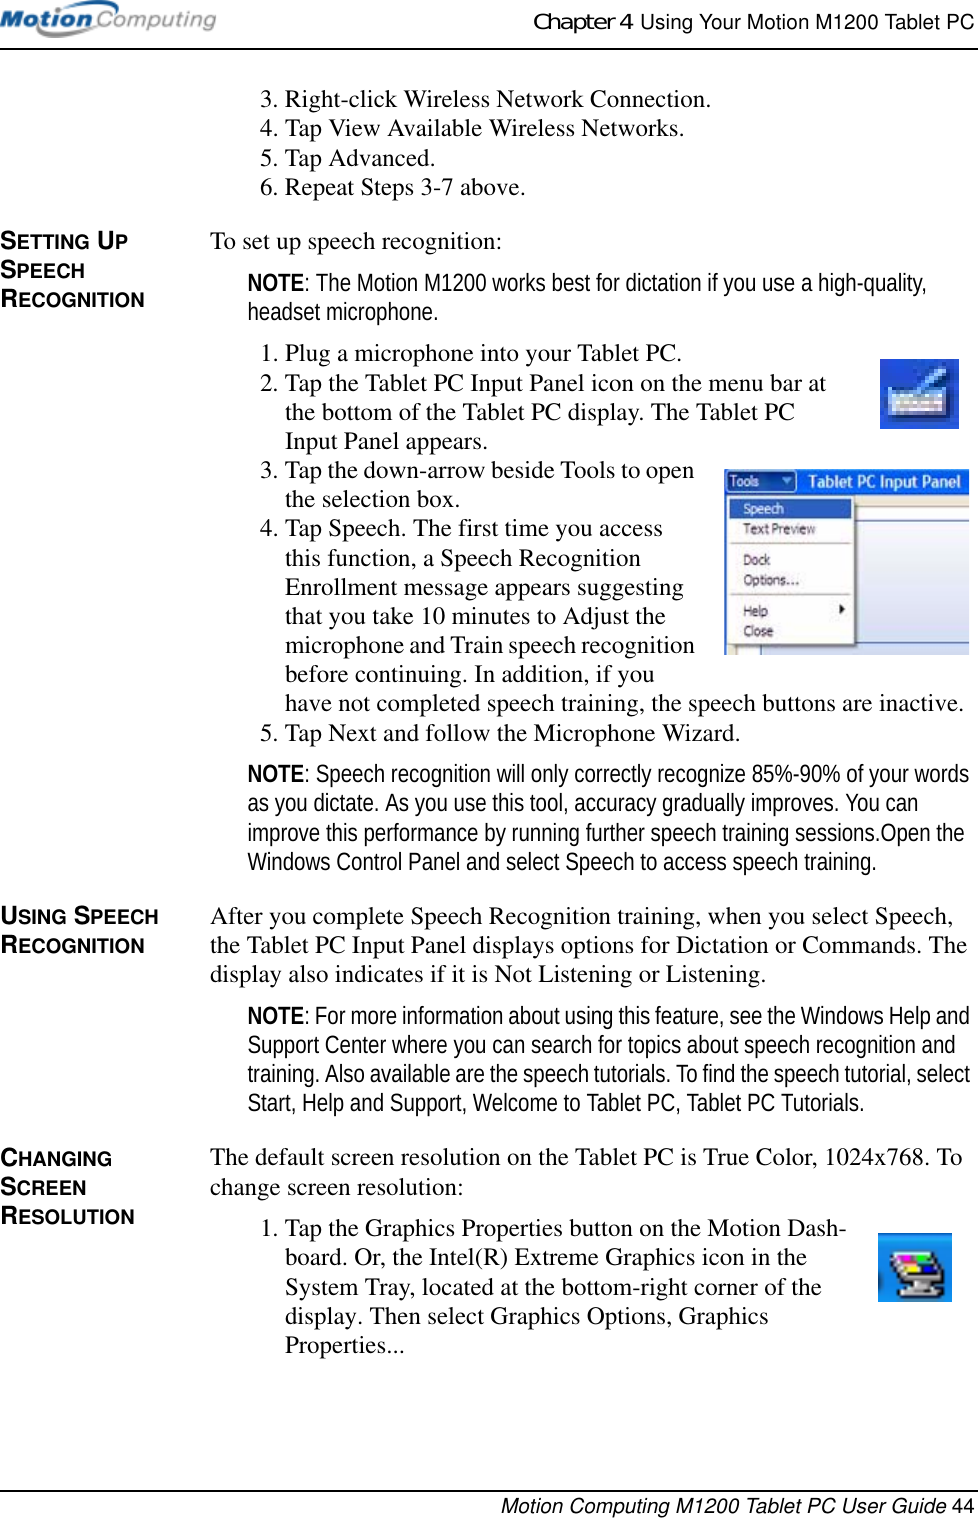 Chapter 4  Using Your Motion M1200 Tablet PCMotion Computing M1200 Tablet PC User Guide 443. Right-click Wireless Network Connection.4. Tap View Available Wireless Networks.5. Tap Advanced.6. Repeat Steps 3-7 above.SETTING UP SPEECH RECOGNITIONTo set up speech recognition:NOTE: The Motion M1200 works best for dictation if you use a high-quality, headset microphone.1. Plug a microphone into your Tablet PC.2. Tap the Tablet PC Input Panel icon on the menu bar at the bottom of the Tablet PC display. The Tablet PC Input Panel appears.3. Tap the down-arrow beside Tools to open the selection box. 4. Tap Speech. The first time you access this function, a Speech Recognition Enrollment message appears suggesting that you take 10 minutes to Adjust the microphone and Train speech recognition before continuing. In addition, if you have not completed speech training, the speech buttons are inactive.5. Tap Next and follow the Microphone Wizard.NOTE: Speech recognition will only correctly recognize 85%-90% of your words as you dictate. As you use this tool, accuracy gradually improves. You can improve this performance by running further speech training sessions.Open the Windows Control Panel and select Speech to access speech training.USING SPEECH RECOGNITIONAfter you complete Speech Recognition training, when you select Speech, the Tablet PC Input Panel displays options for Dictation or Commands. The display also indicates if it is Not Listening or Listening.NOTE: For more information about using this feature, see the Windows Help and Support Center where you can search for topics about speech recognition and training. Also available are the speech tutorials. To find the speech tutorial, select Start, Help and Support, Welcome to Tablet PC, Tablet PC Tutorials.CHANGING SCREEN RESOLUTION The default screen resolution on the Tablet PC is True Color, 1024x768. To change screen resolution:1. Tap the Graphics Properties button on the Motion Dash-board. Or, the Intel(R) Extreme Graphics icon in the System Tray, located at the bottom-right corner of the display. Then select Graphics Options, Graphics Properties... 